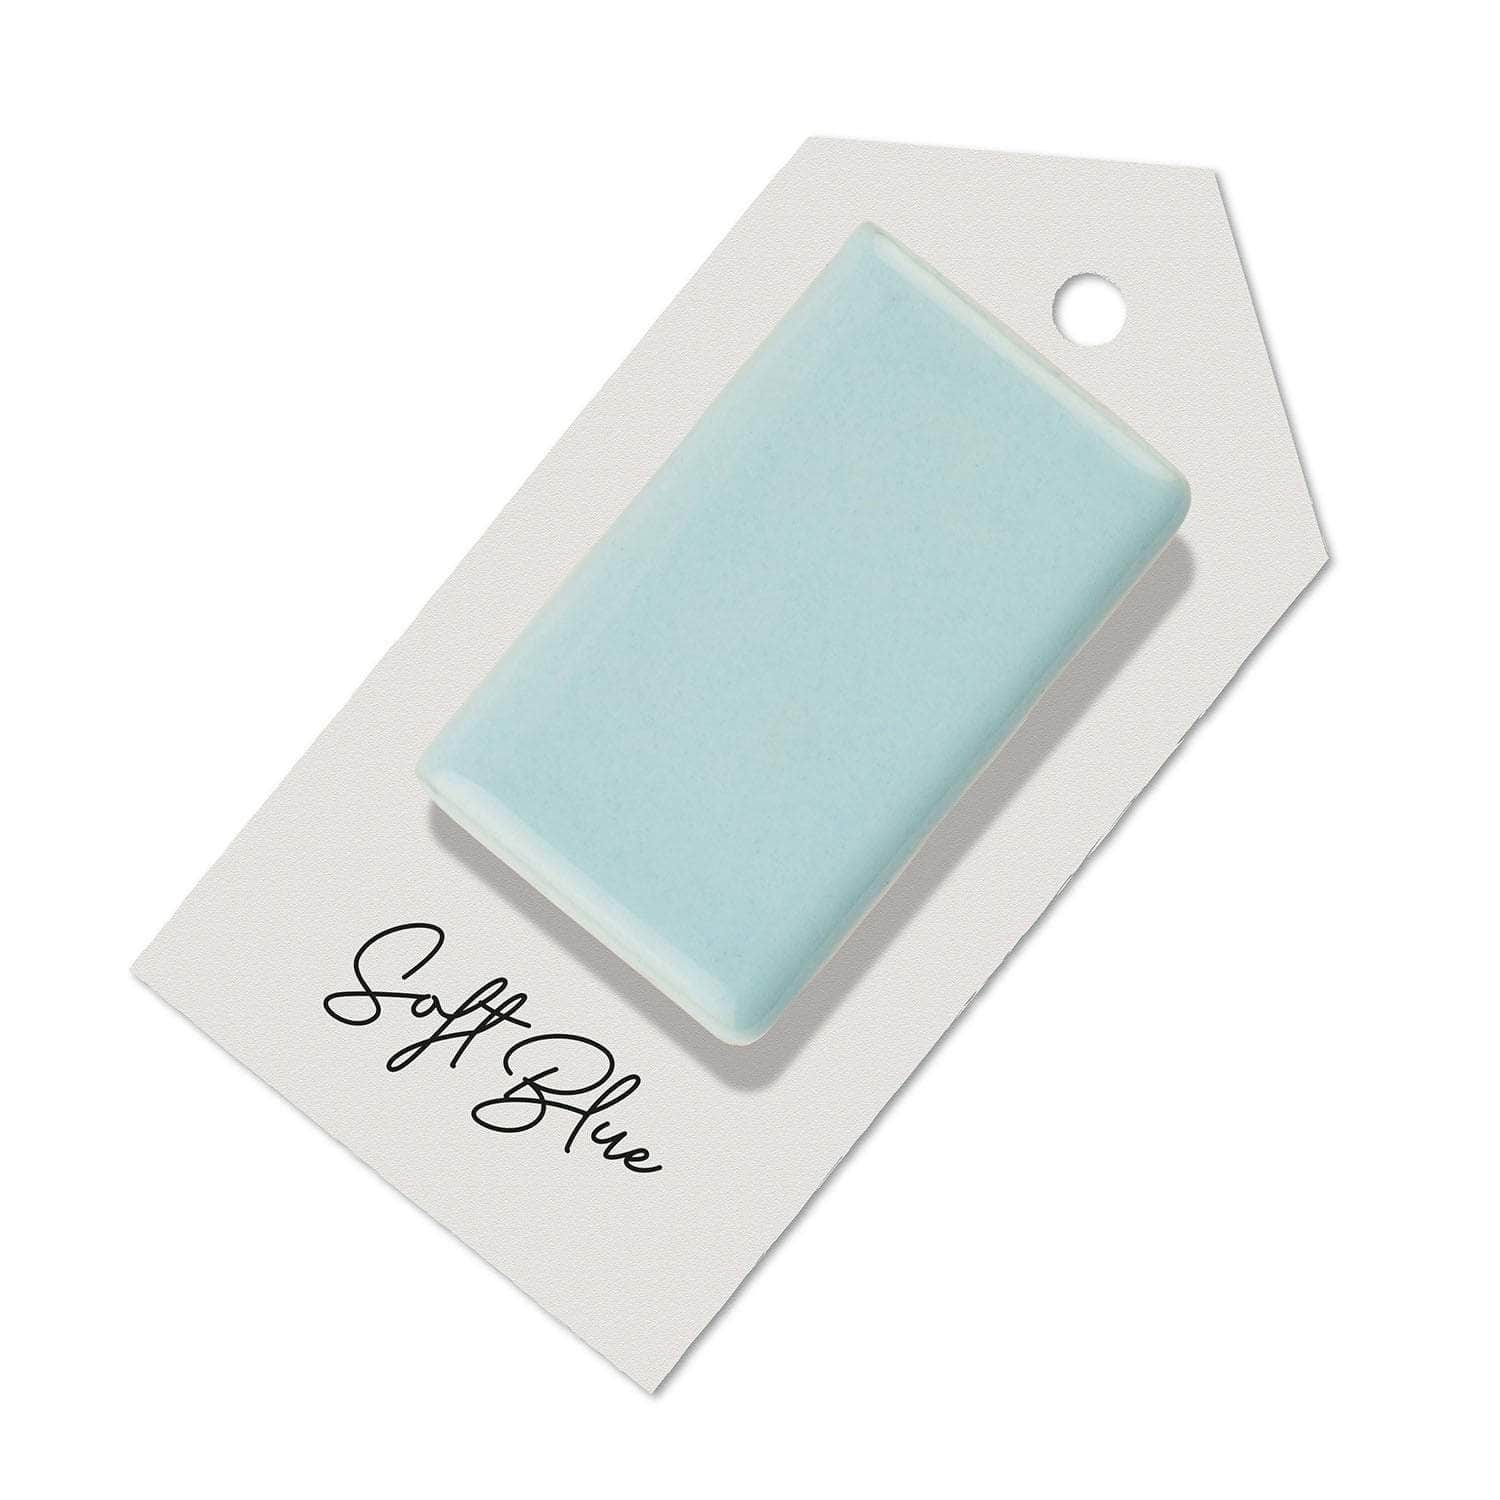 Soft Blue sample for Aga range cooker re-enamelling & reconditioned cookers